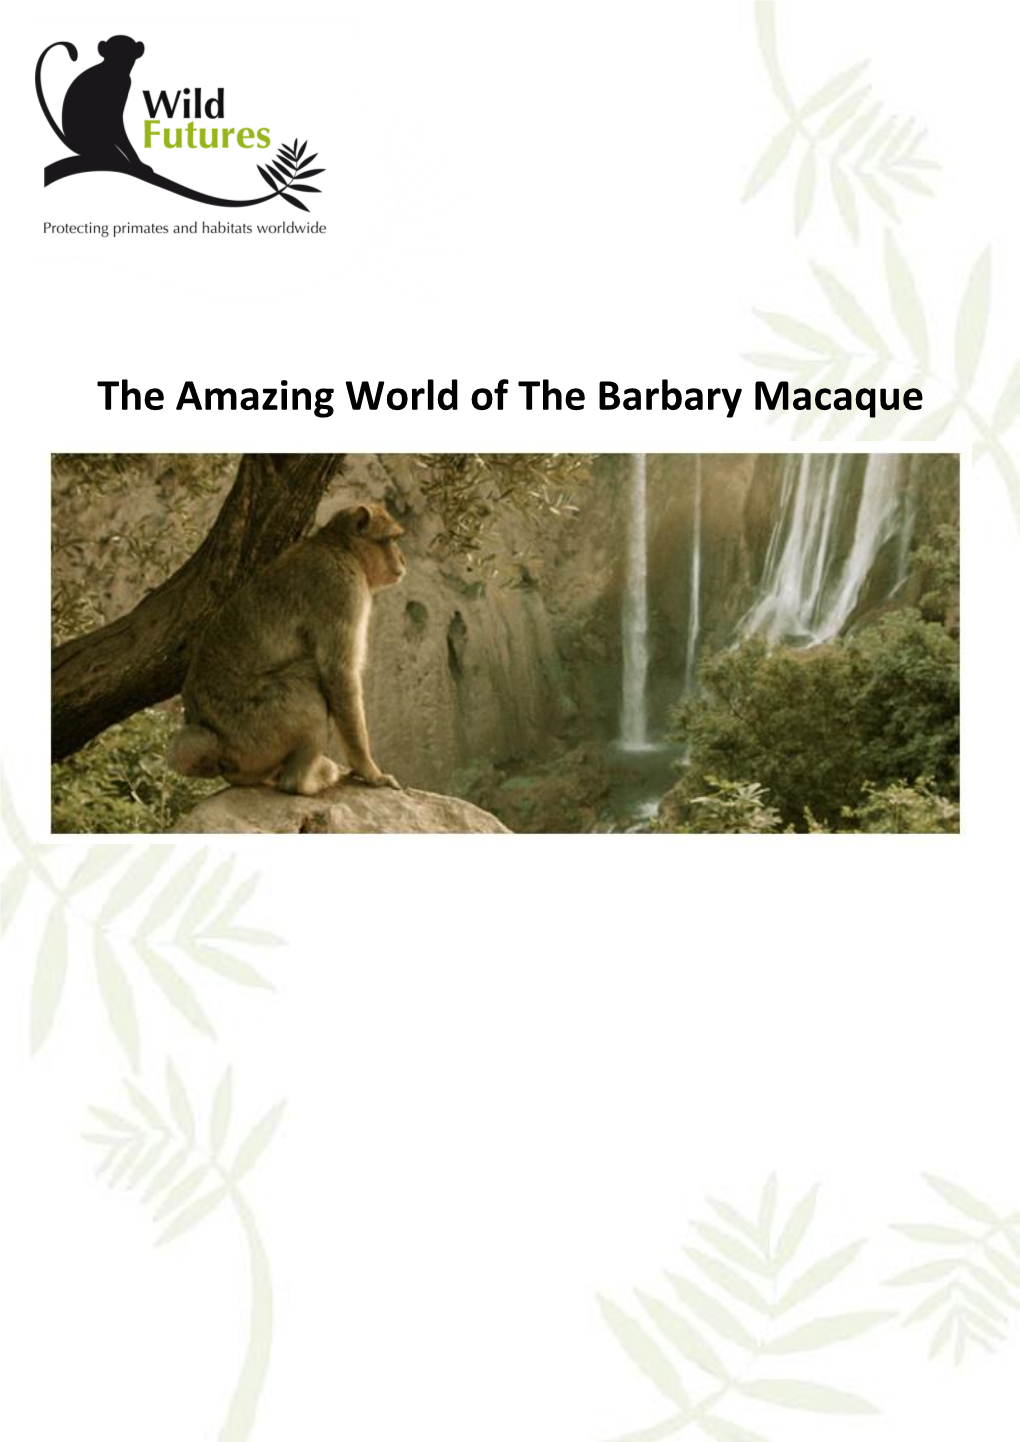 The Amazing World of the Barbary Macaque